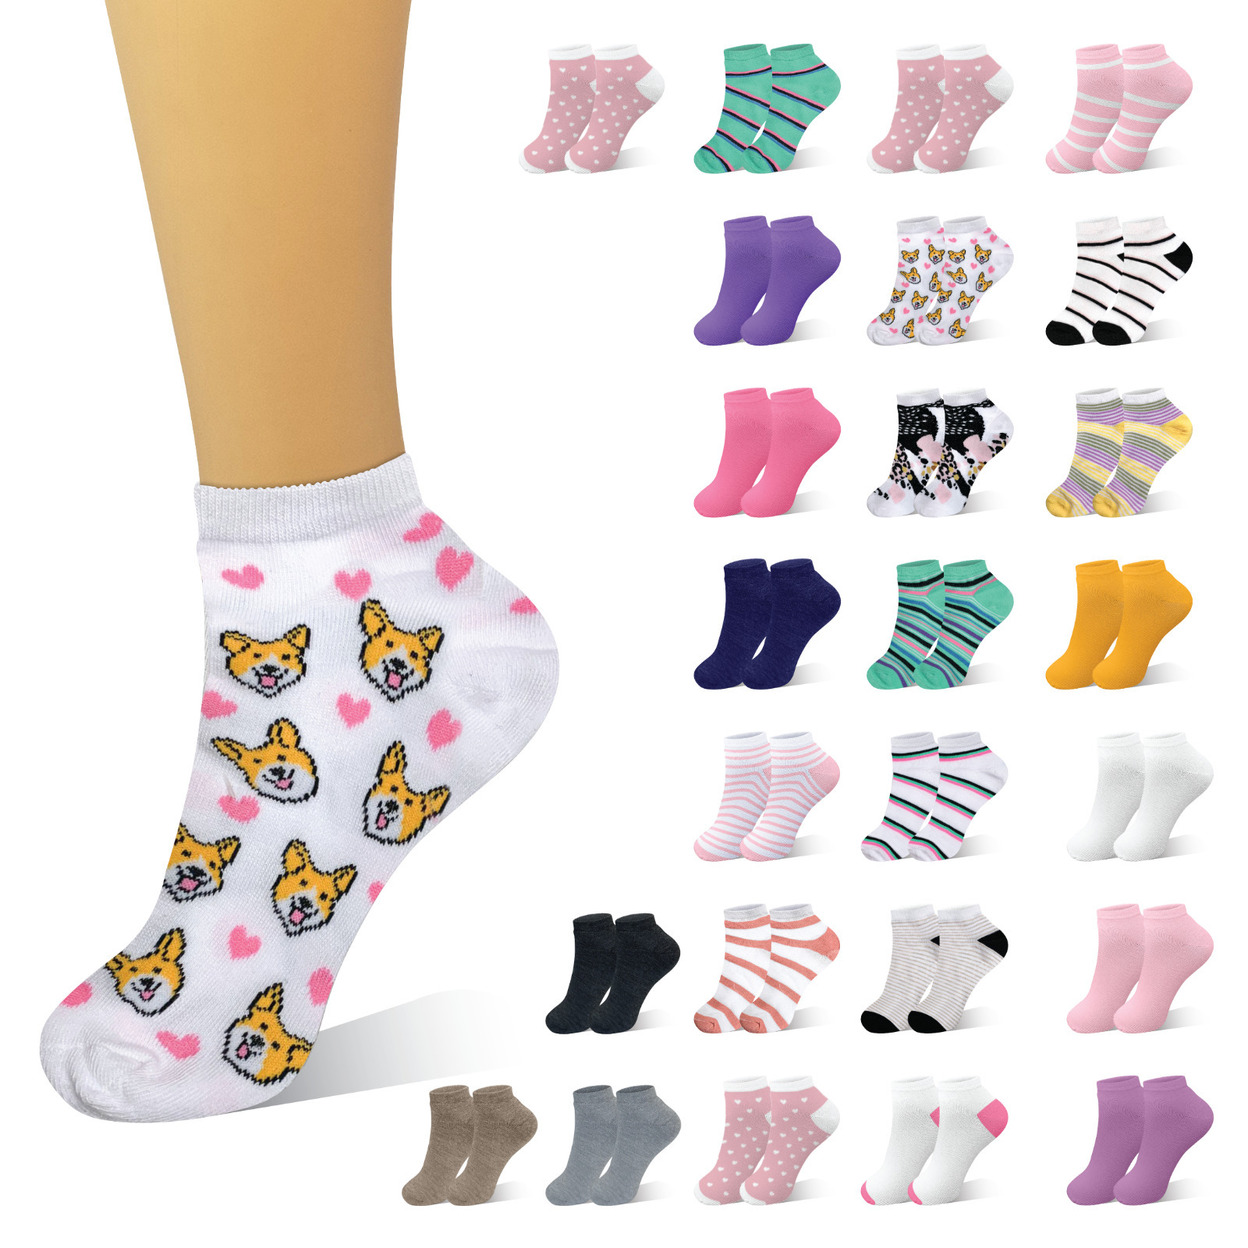 30-Pairs: Women’s Breathable Fun-Funky Colorful No Show Low Cut Ankle Socks